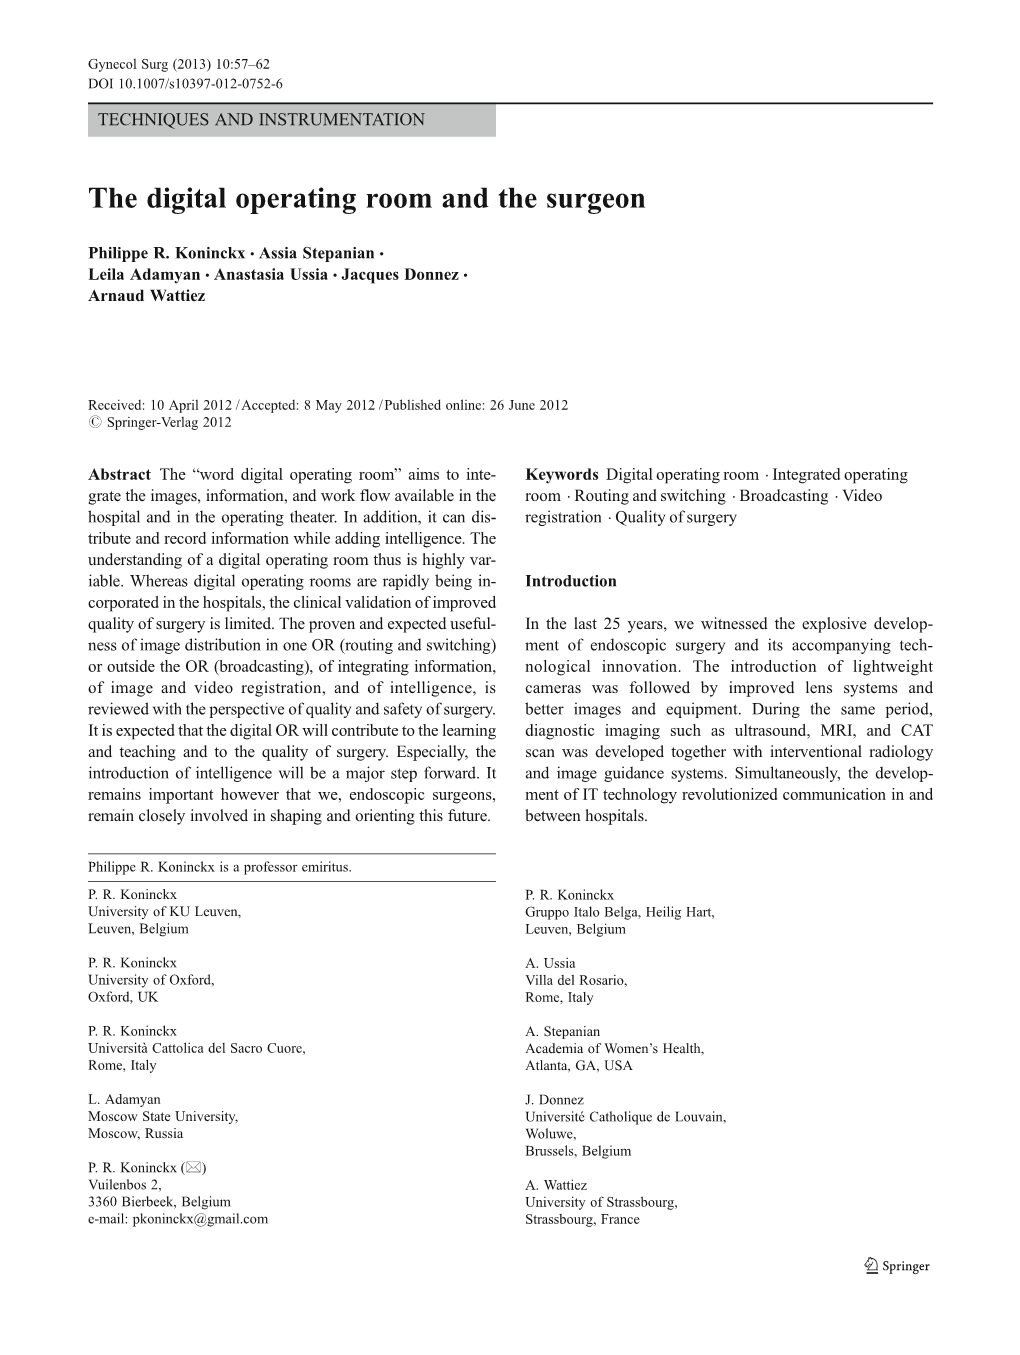 The Digital Operating Room and the Surgeon